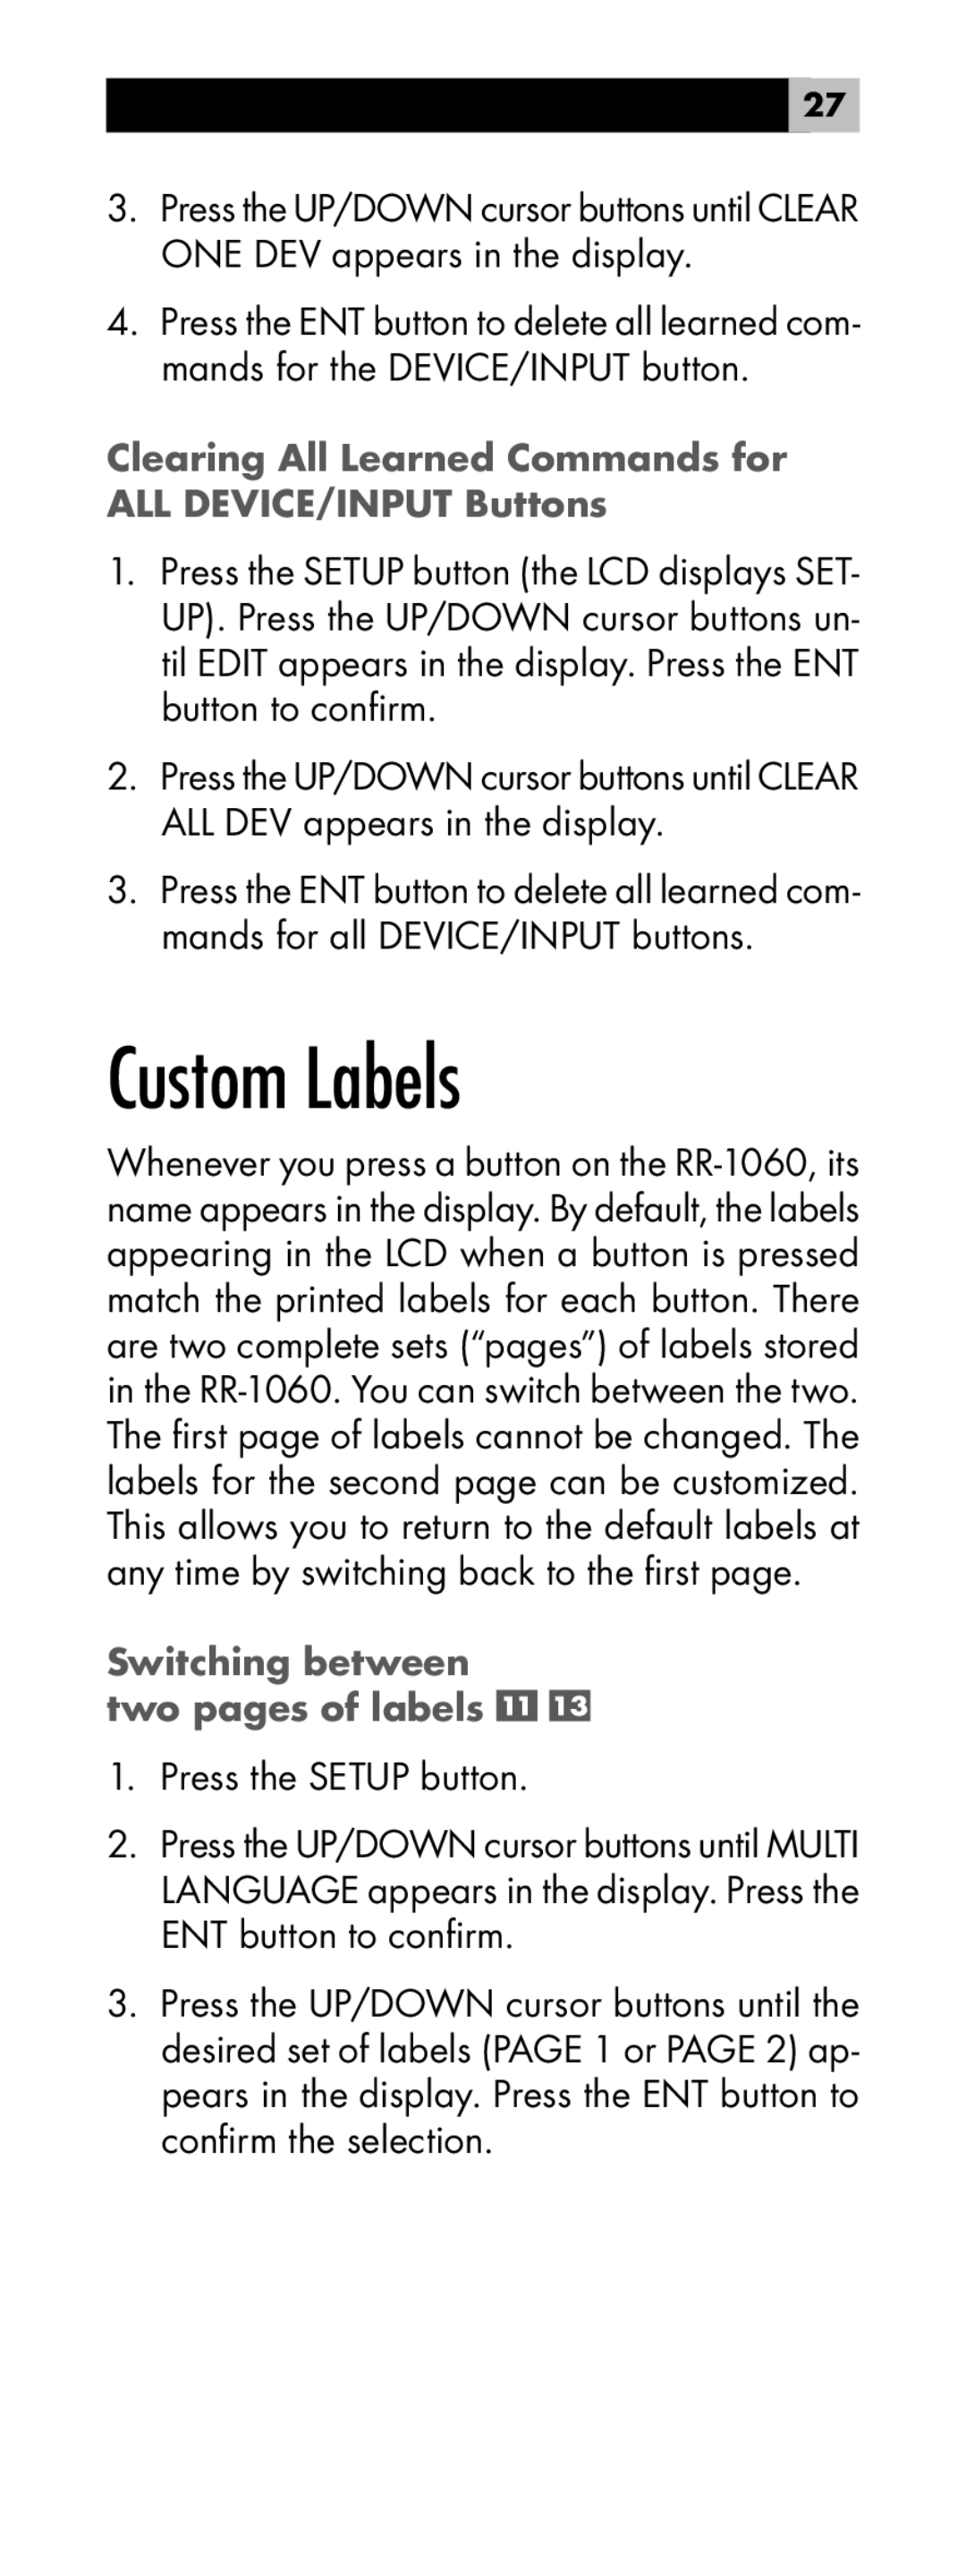 Rotel RR-1060 manual Custom Labels, Clearing All Learned Commands for ALL DEVICE/INPUT Buttons 